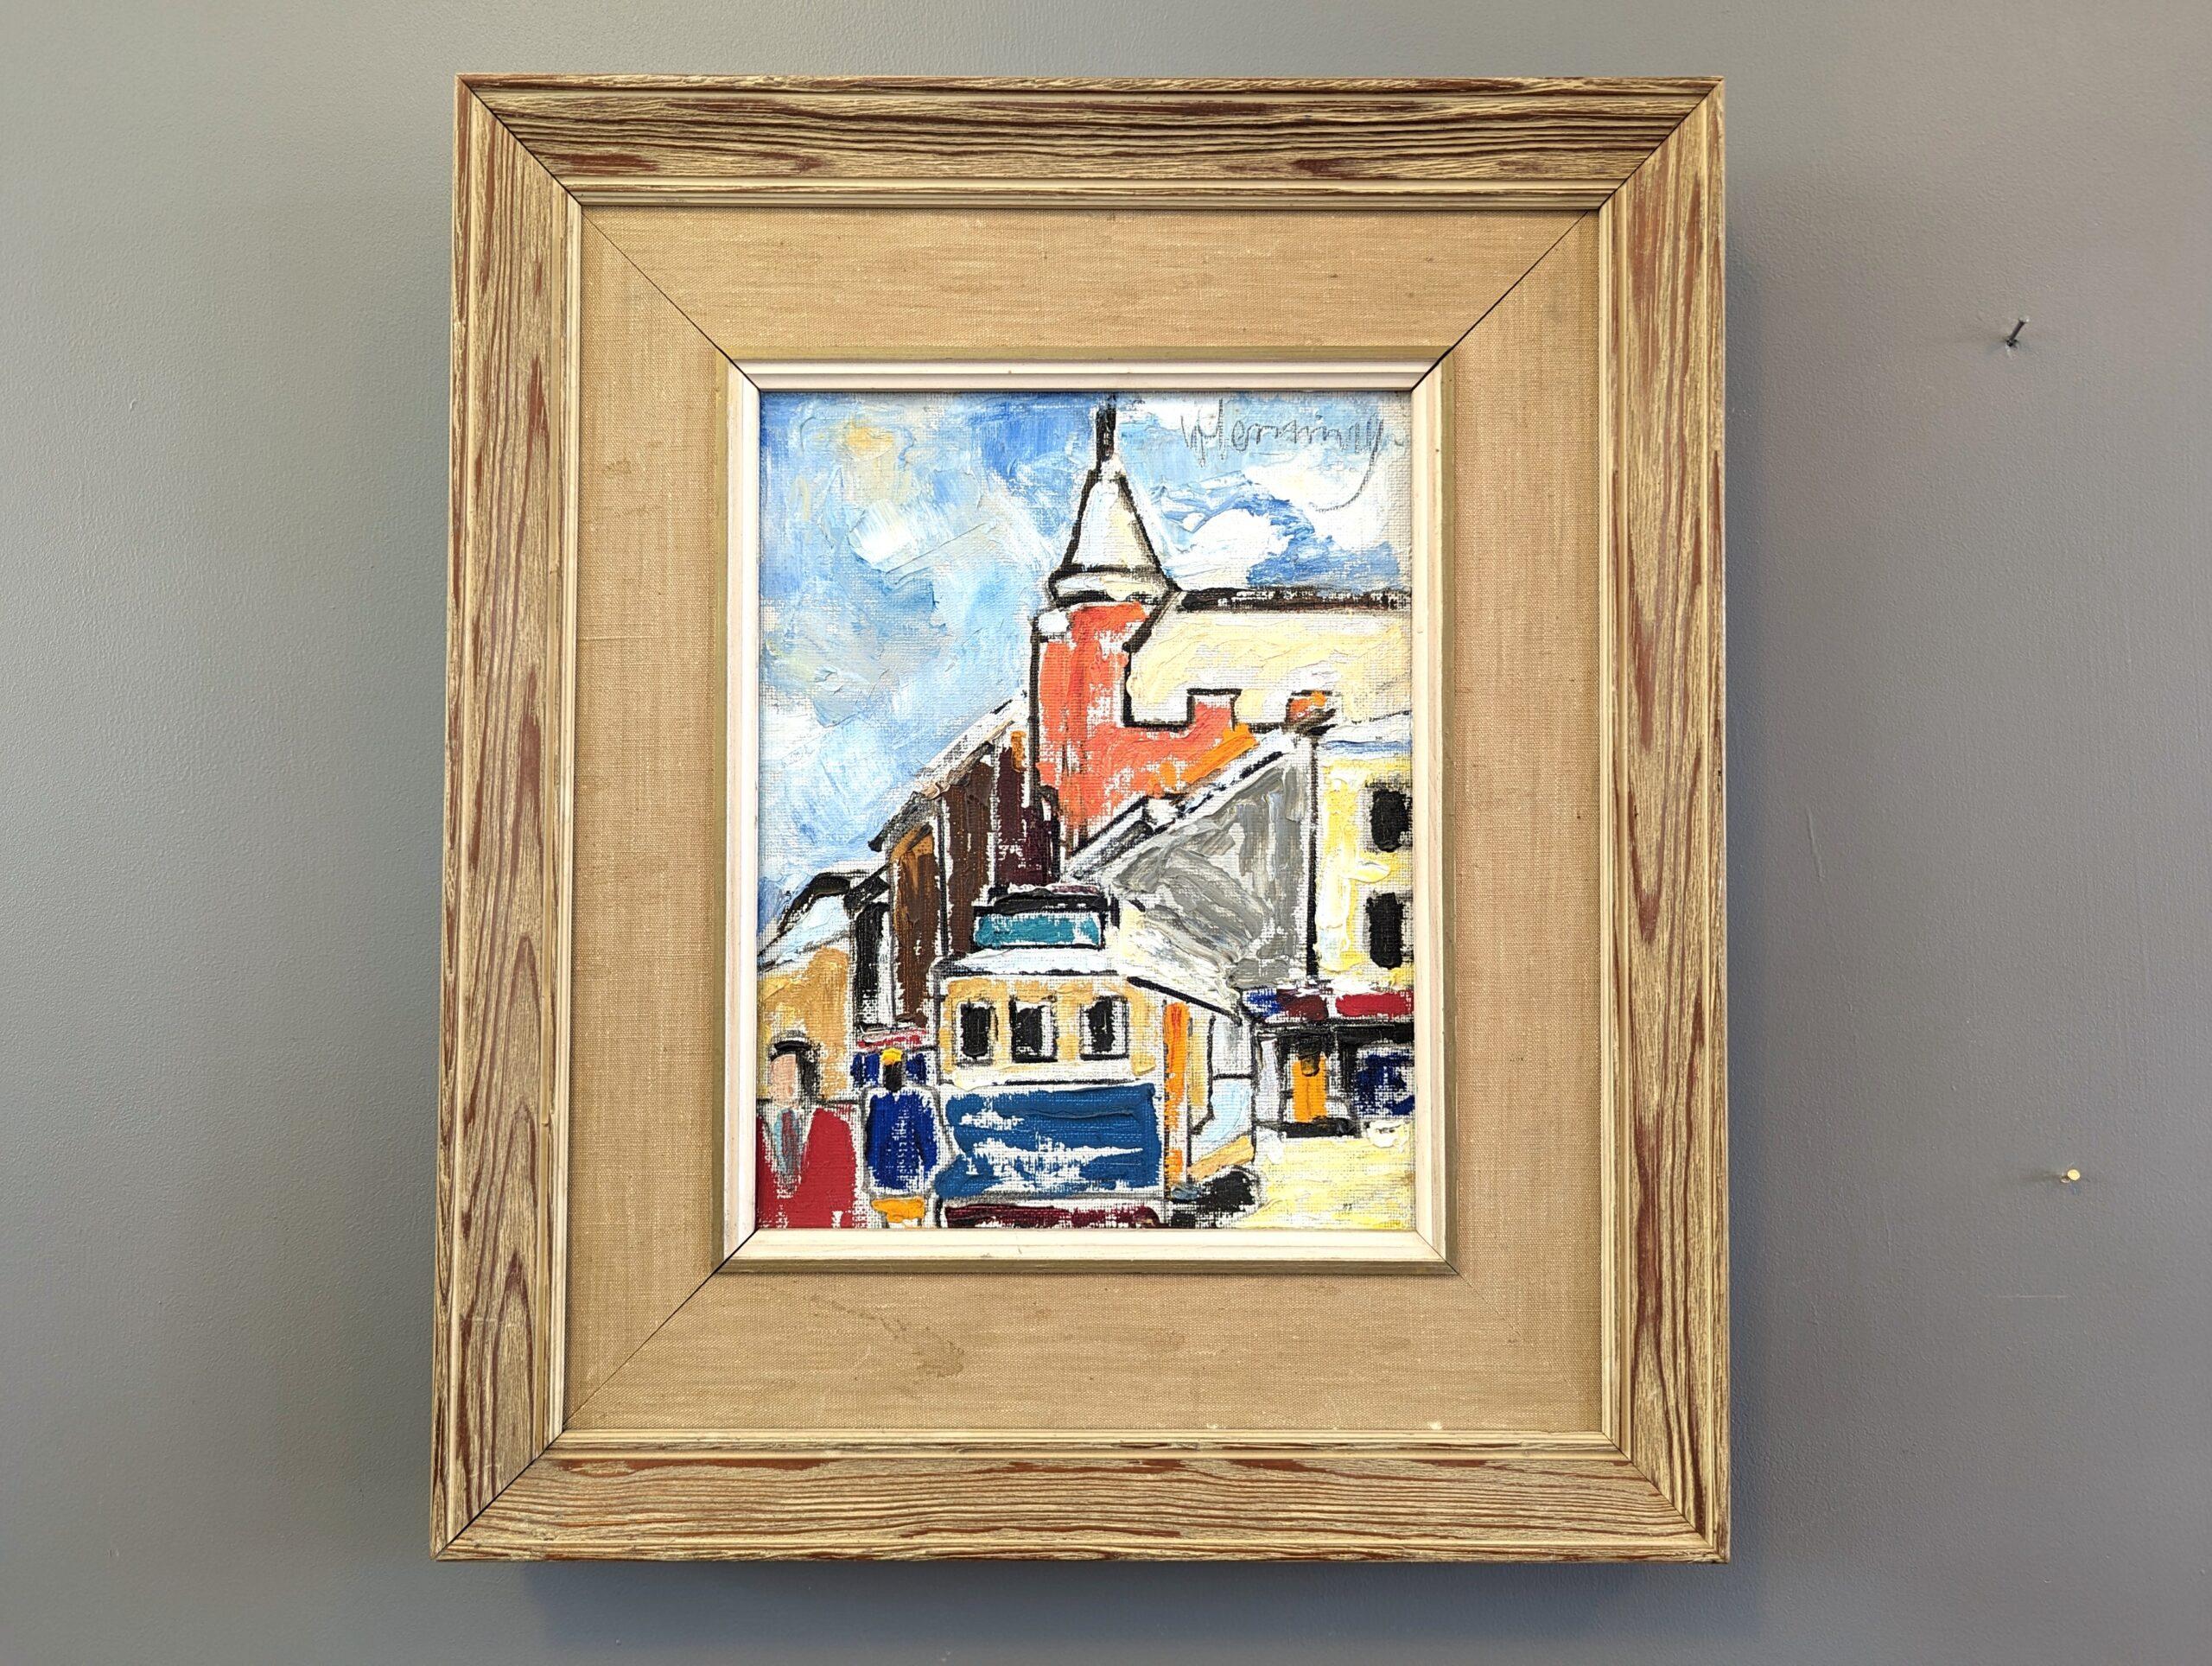 THE TRAM
Size: 38 x 33 cm (including frame)
Oil on Canvas

A small yet very striking modernist street scene composition, executed in oil onto canvas.

The painting depicts a bustling scene in a city with a tram and some figures strolling in the